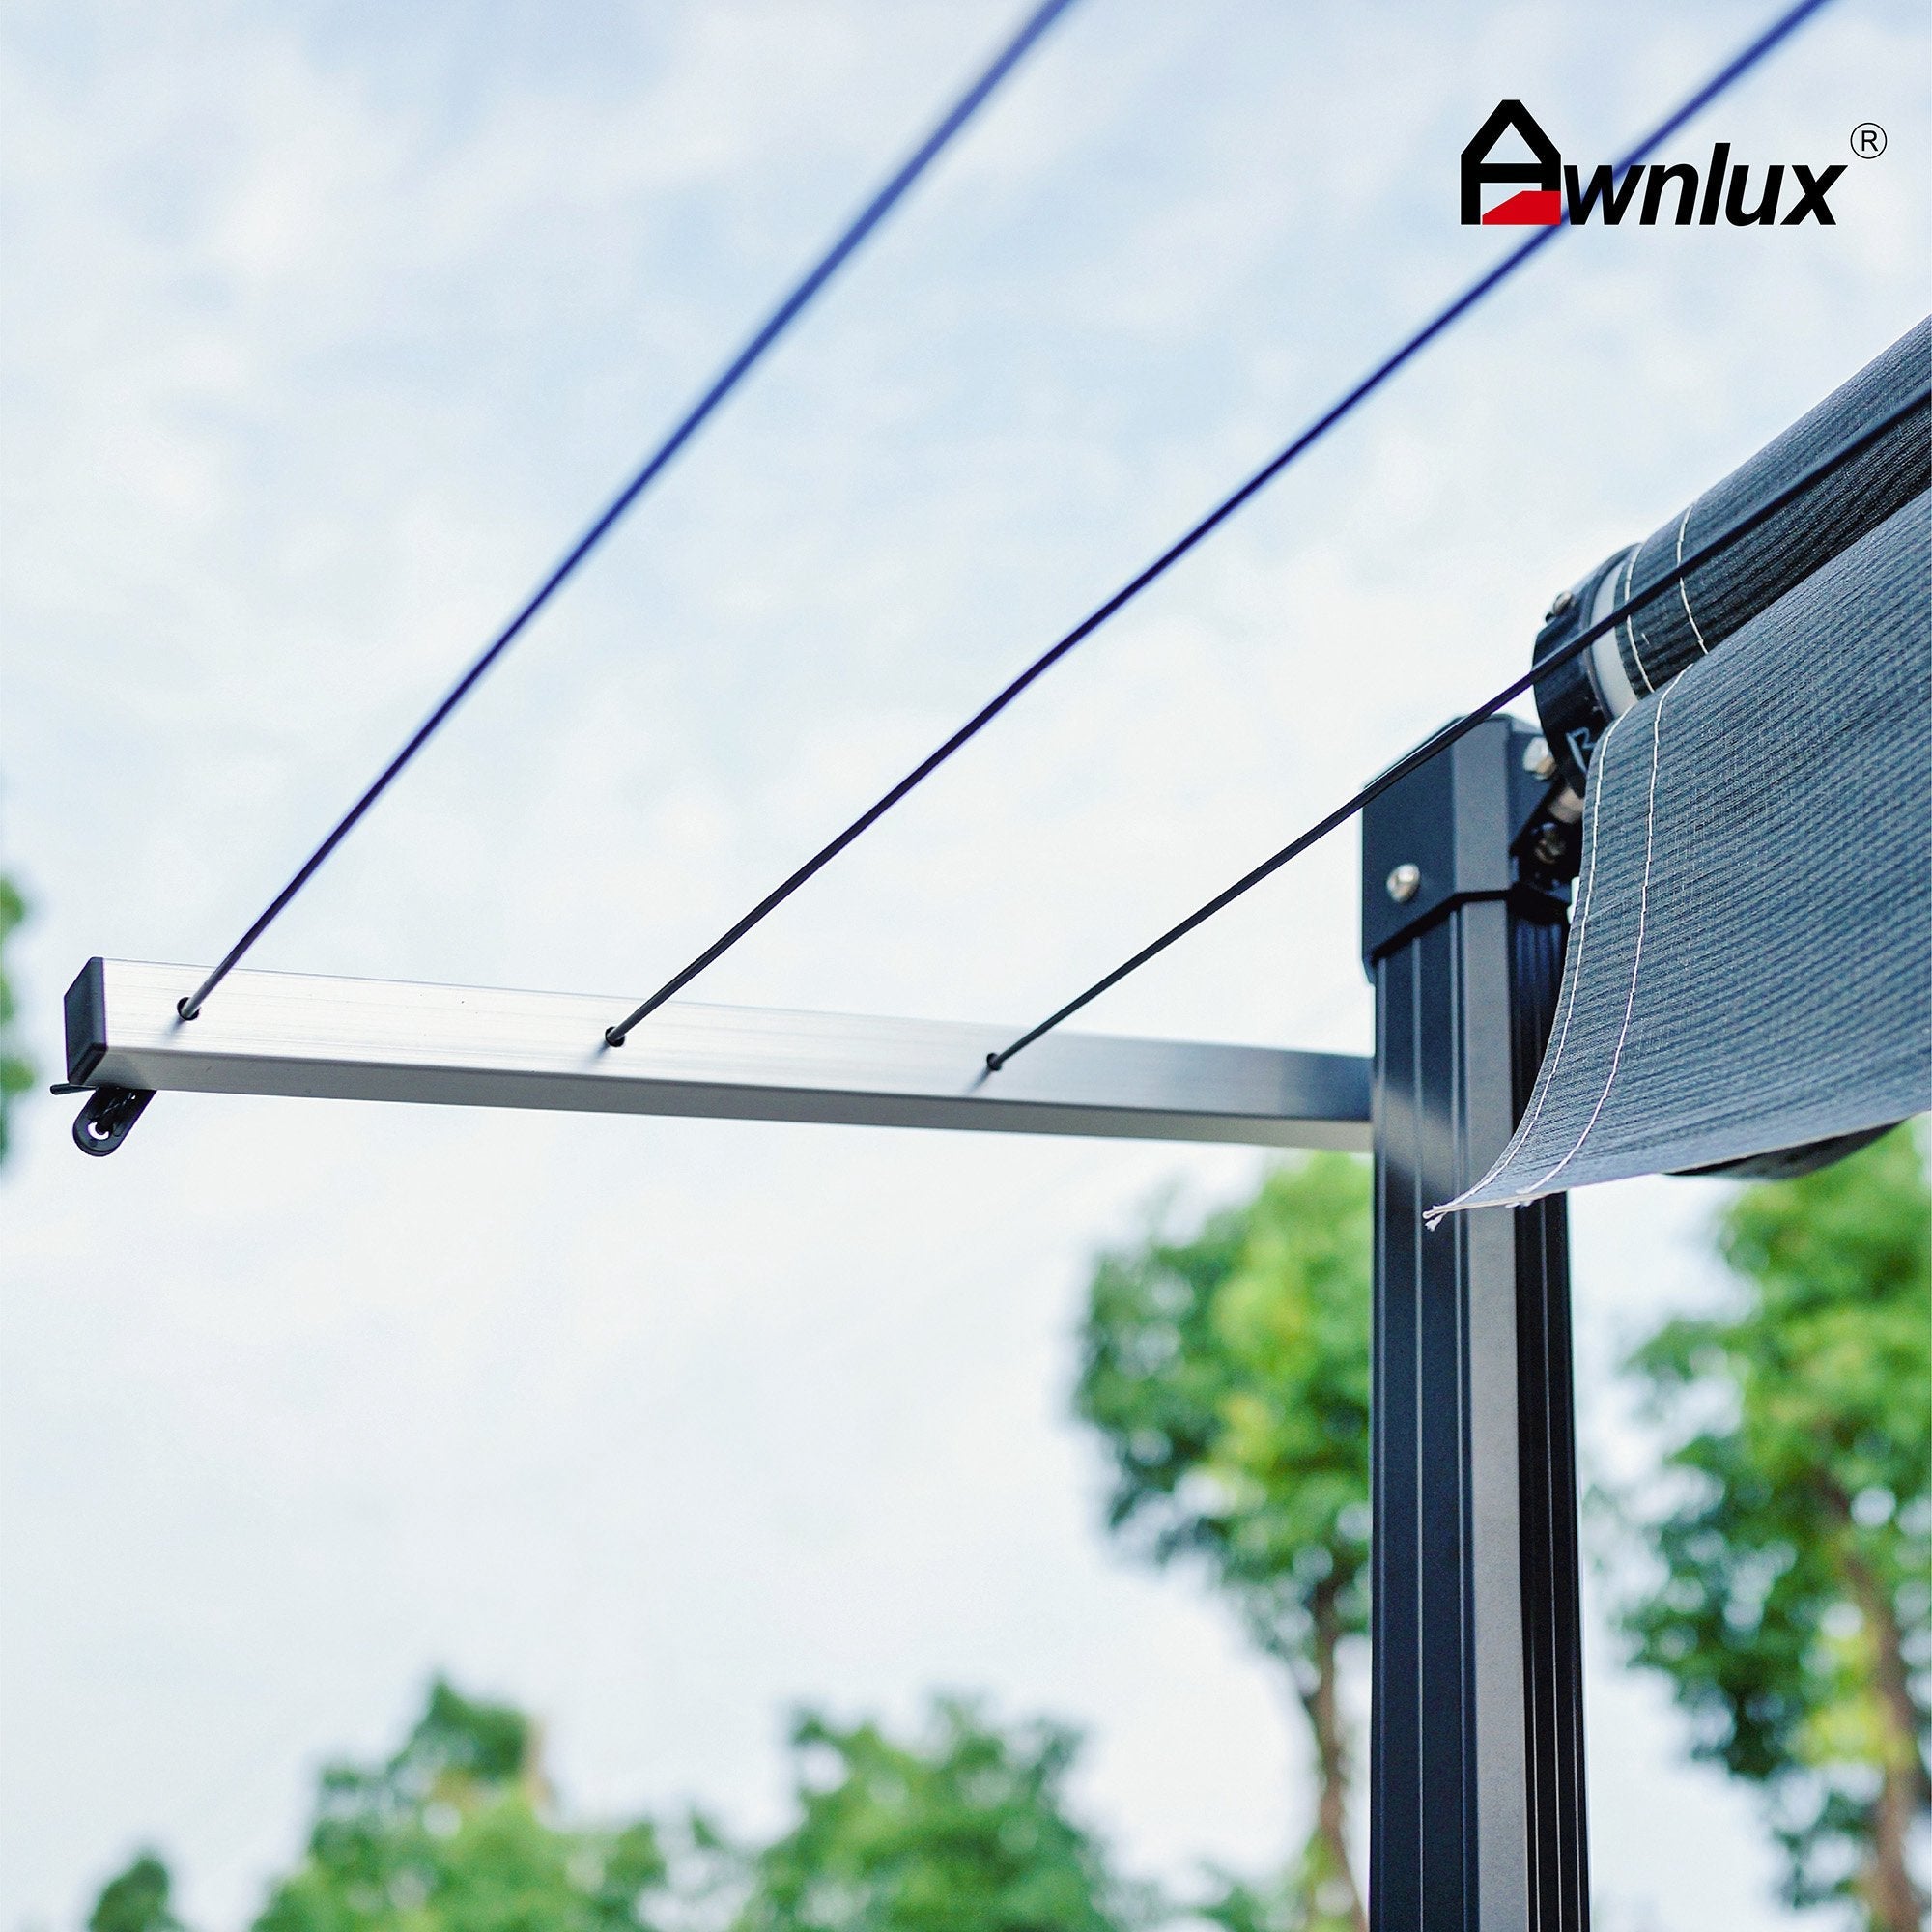 AWNLUX RV Camping Clothes hanger - AWNLUX